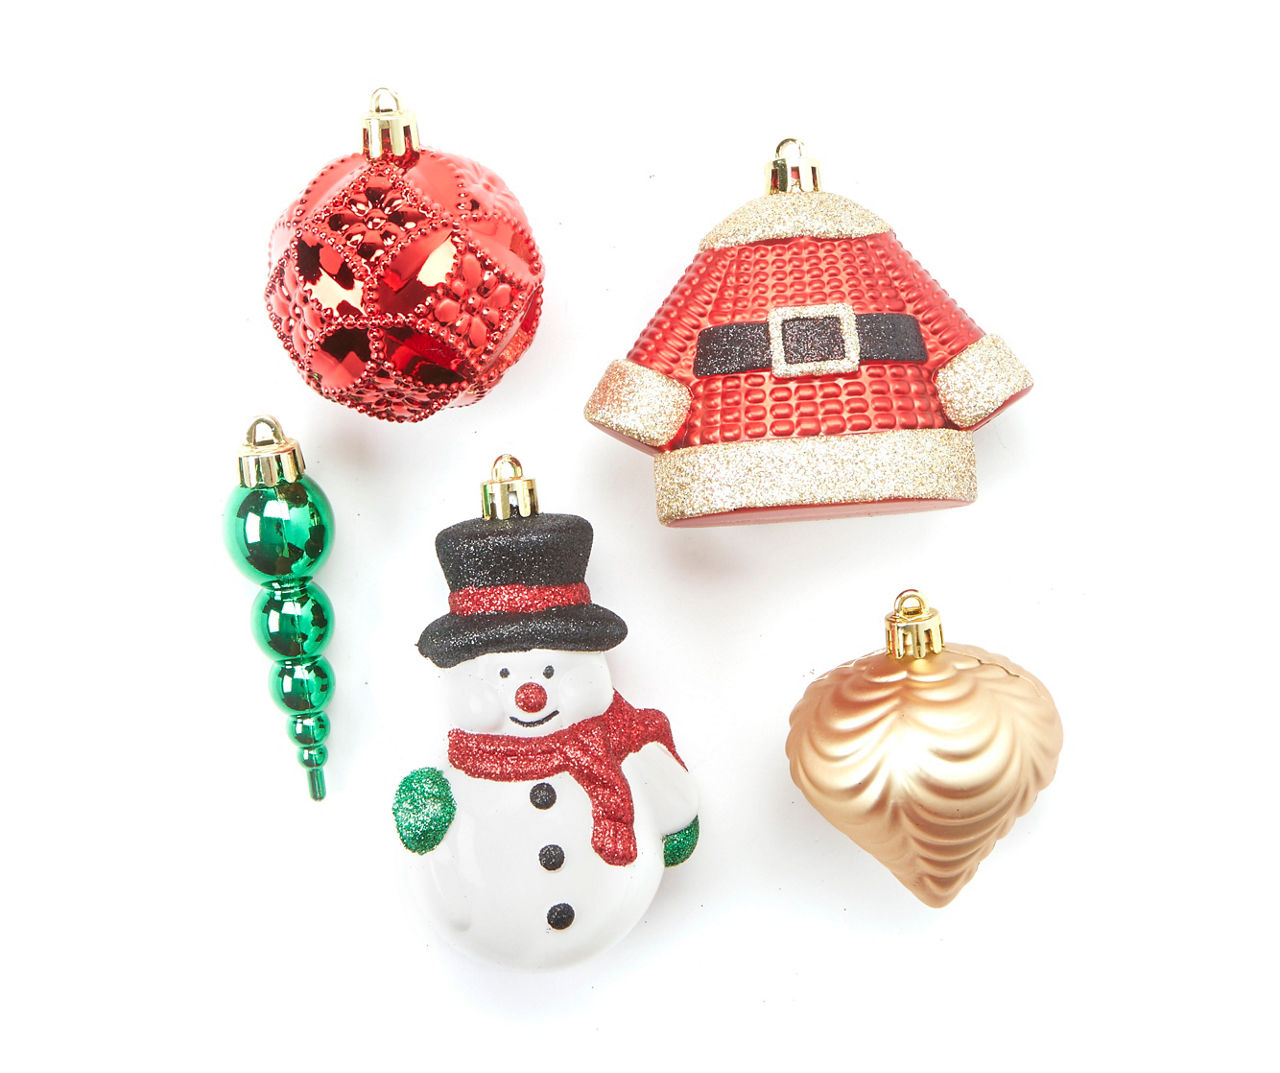 Winter Lane Mini Lantern Glass Ornaments with Gift Bags - Set of 3